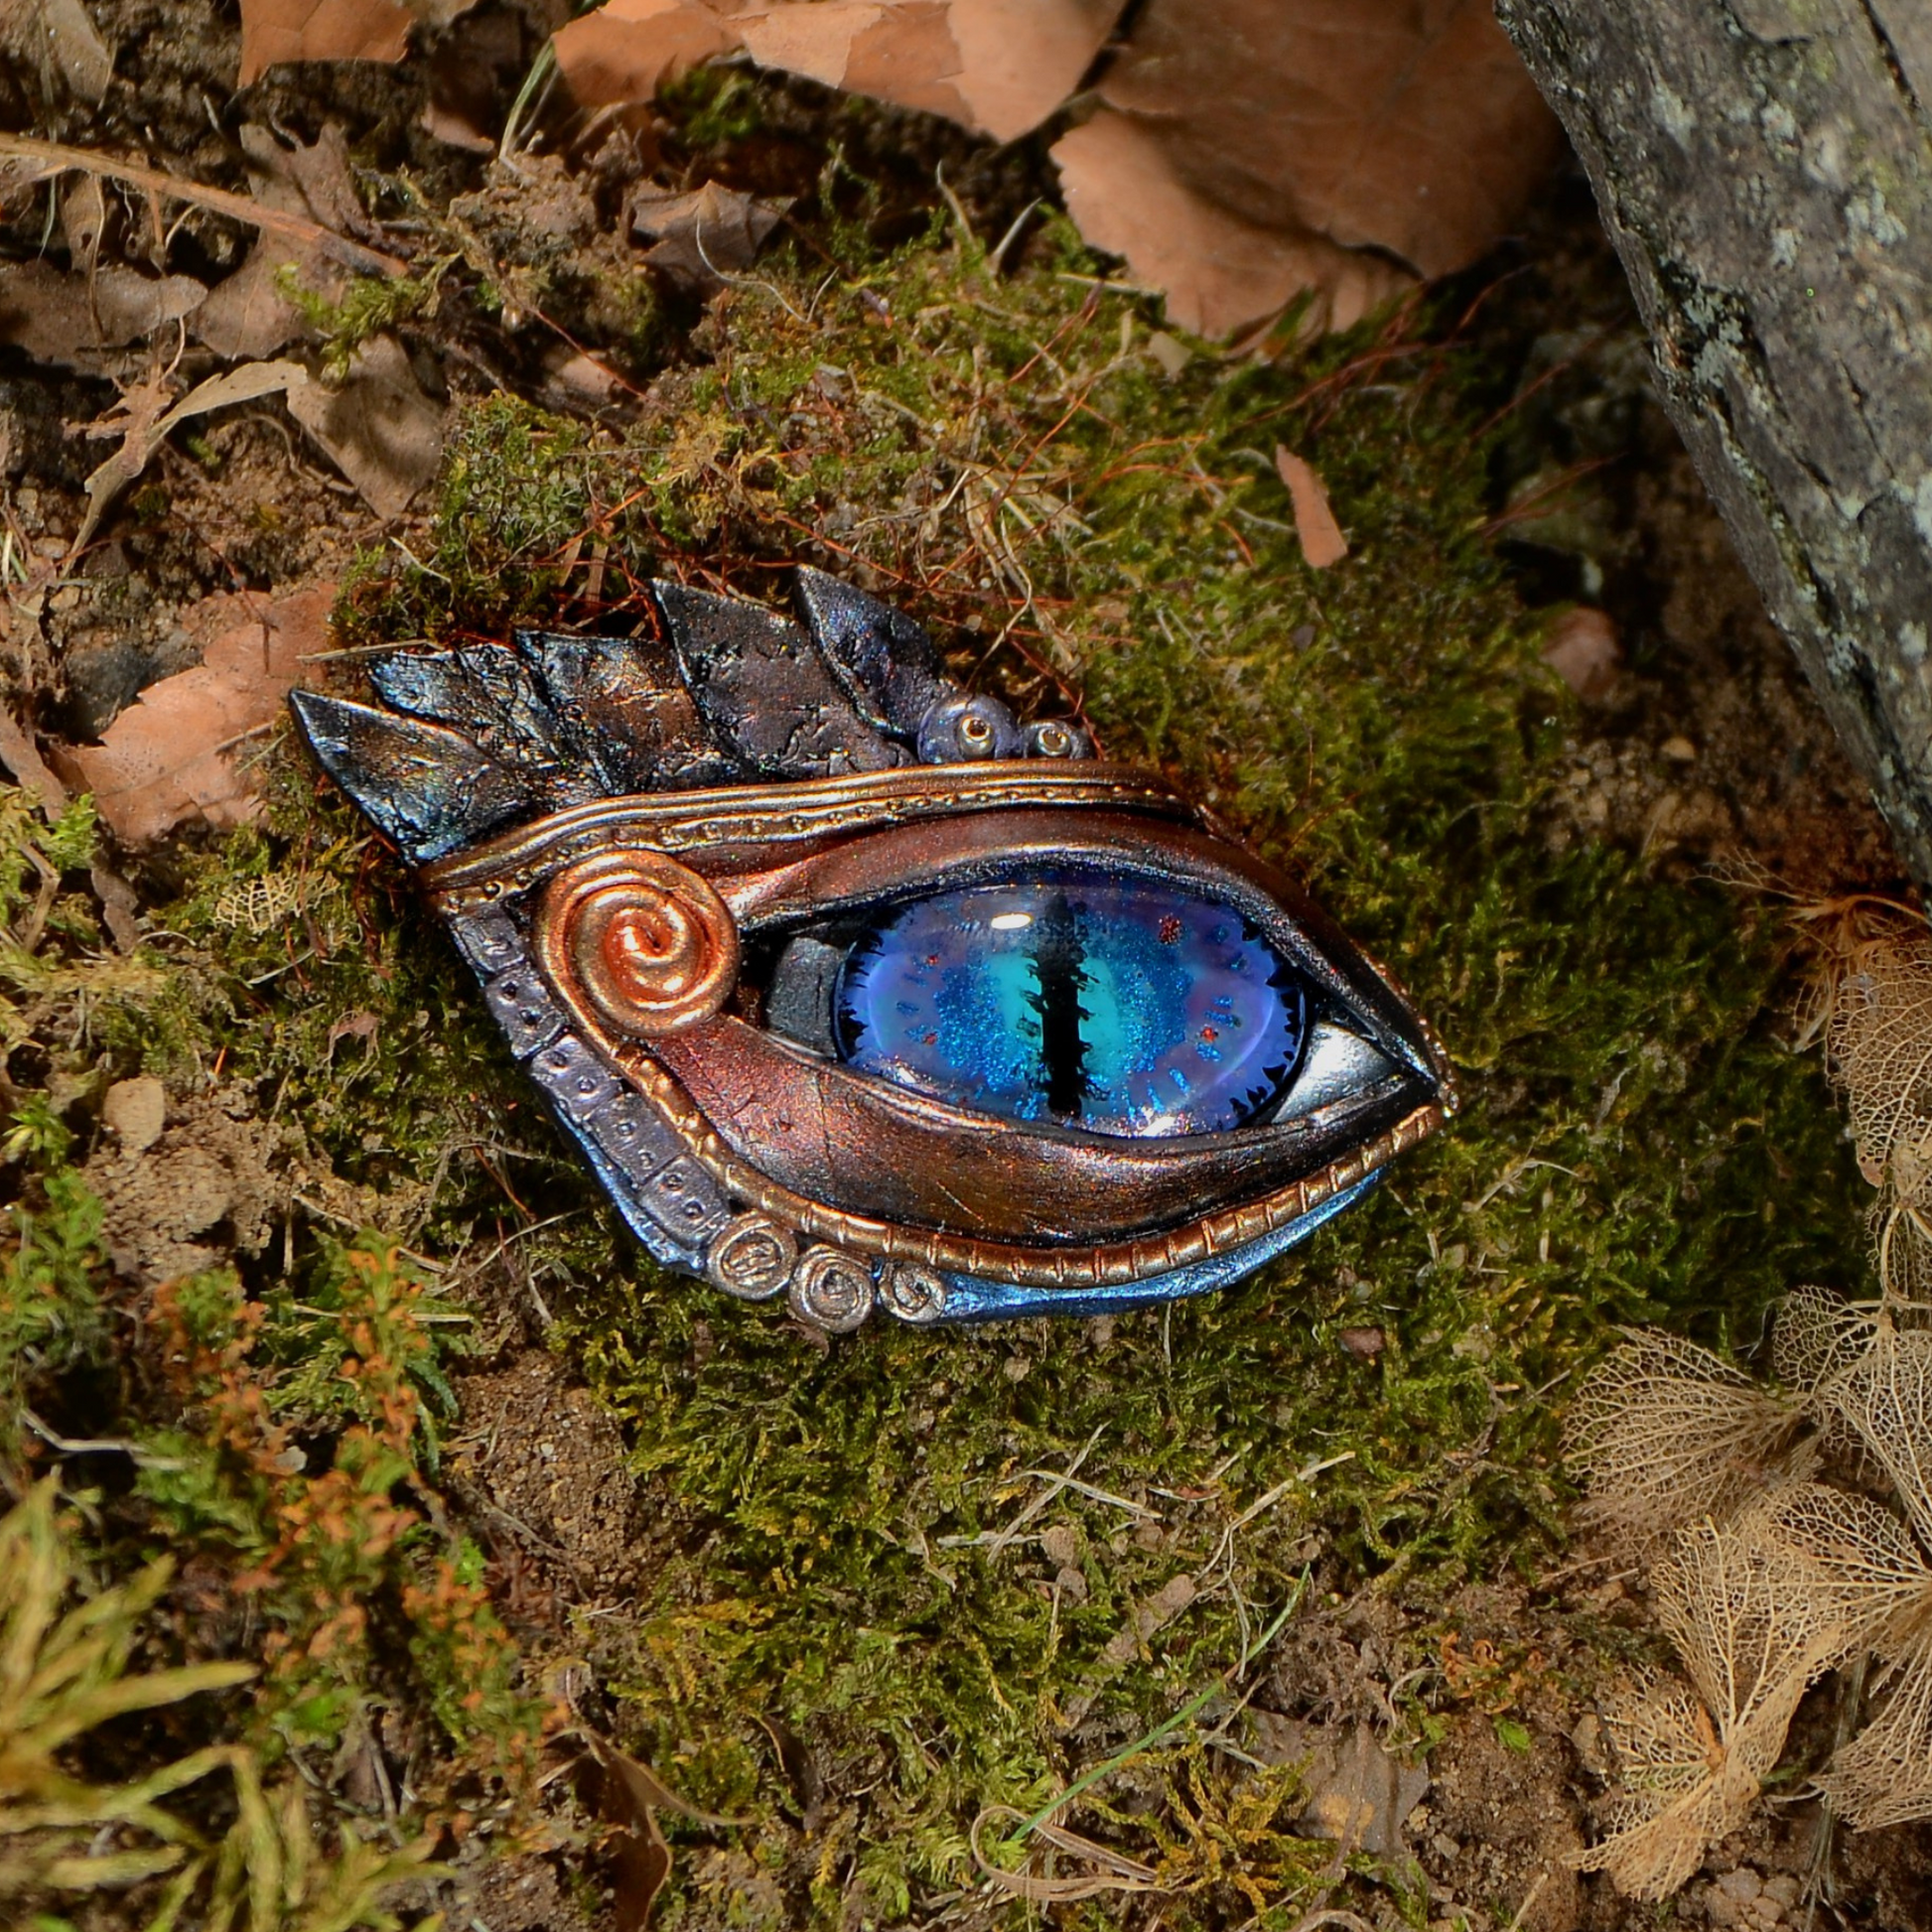 egyptian blue eye brooch with gold and bronze feather details and gold swirl at corner of the eye. on moss near a tree.